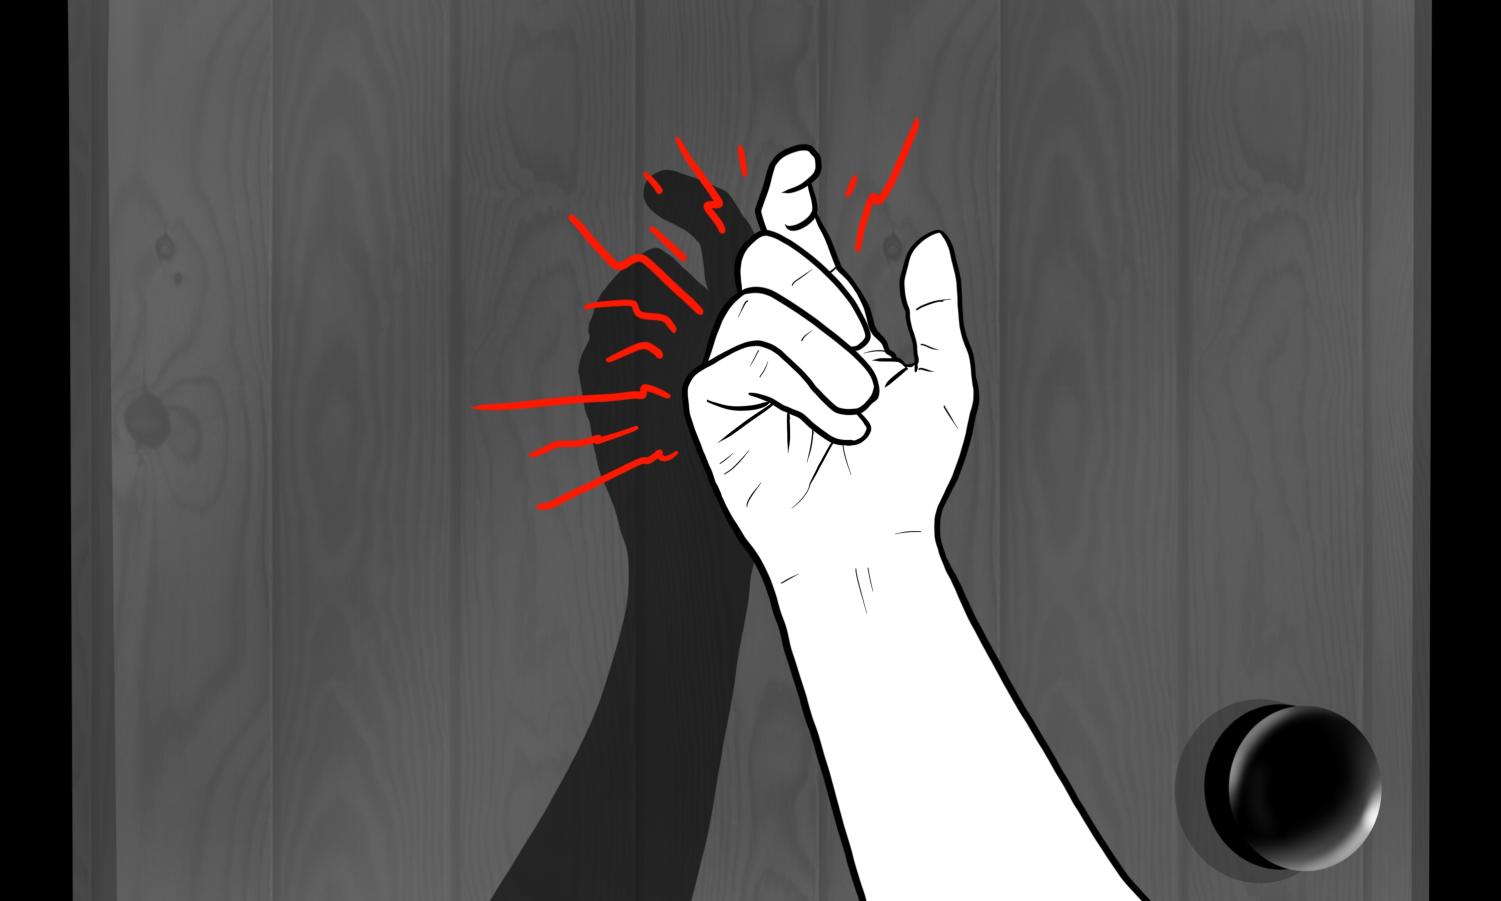 An+illustration+of+a+hand+knocking+on+a+wooden+door%2C+with+red+rays+emerging+from+the+fist.